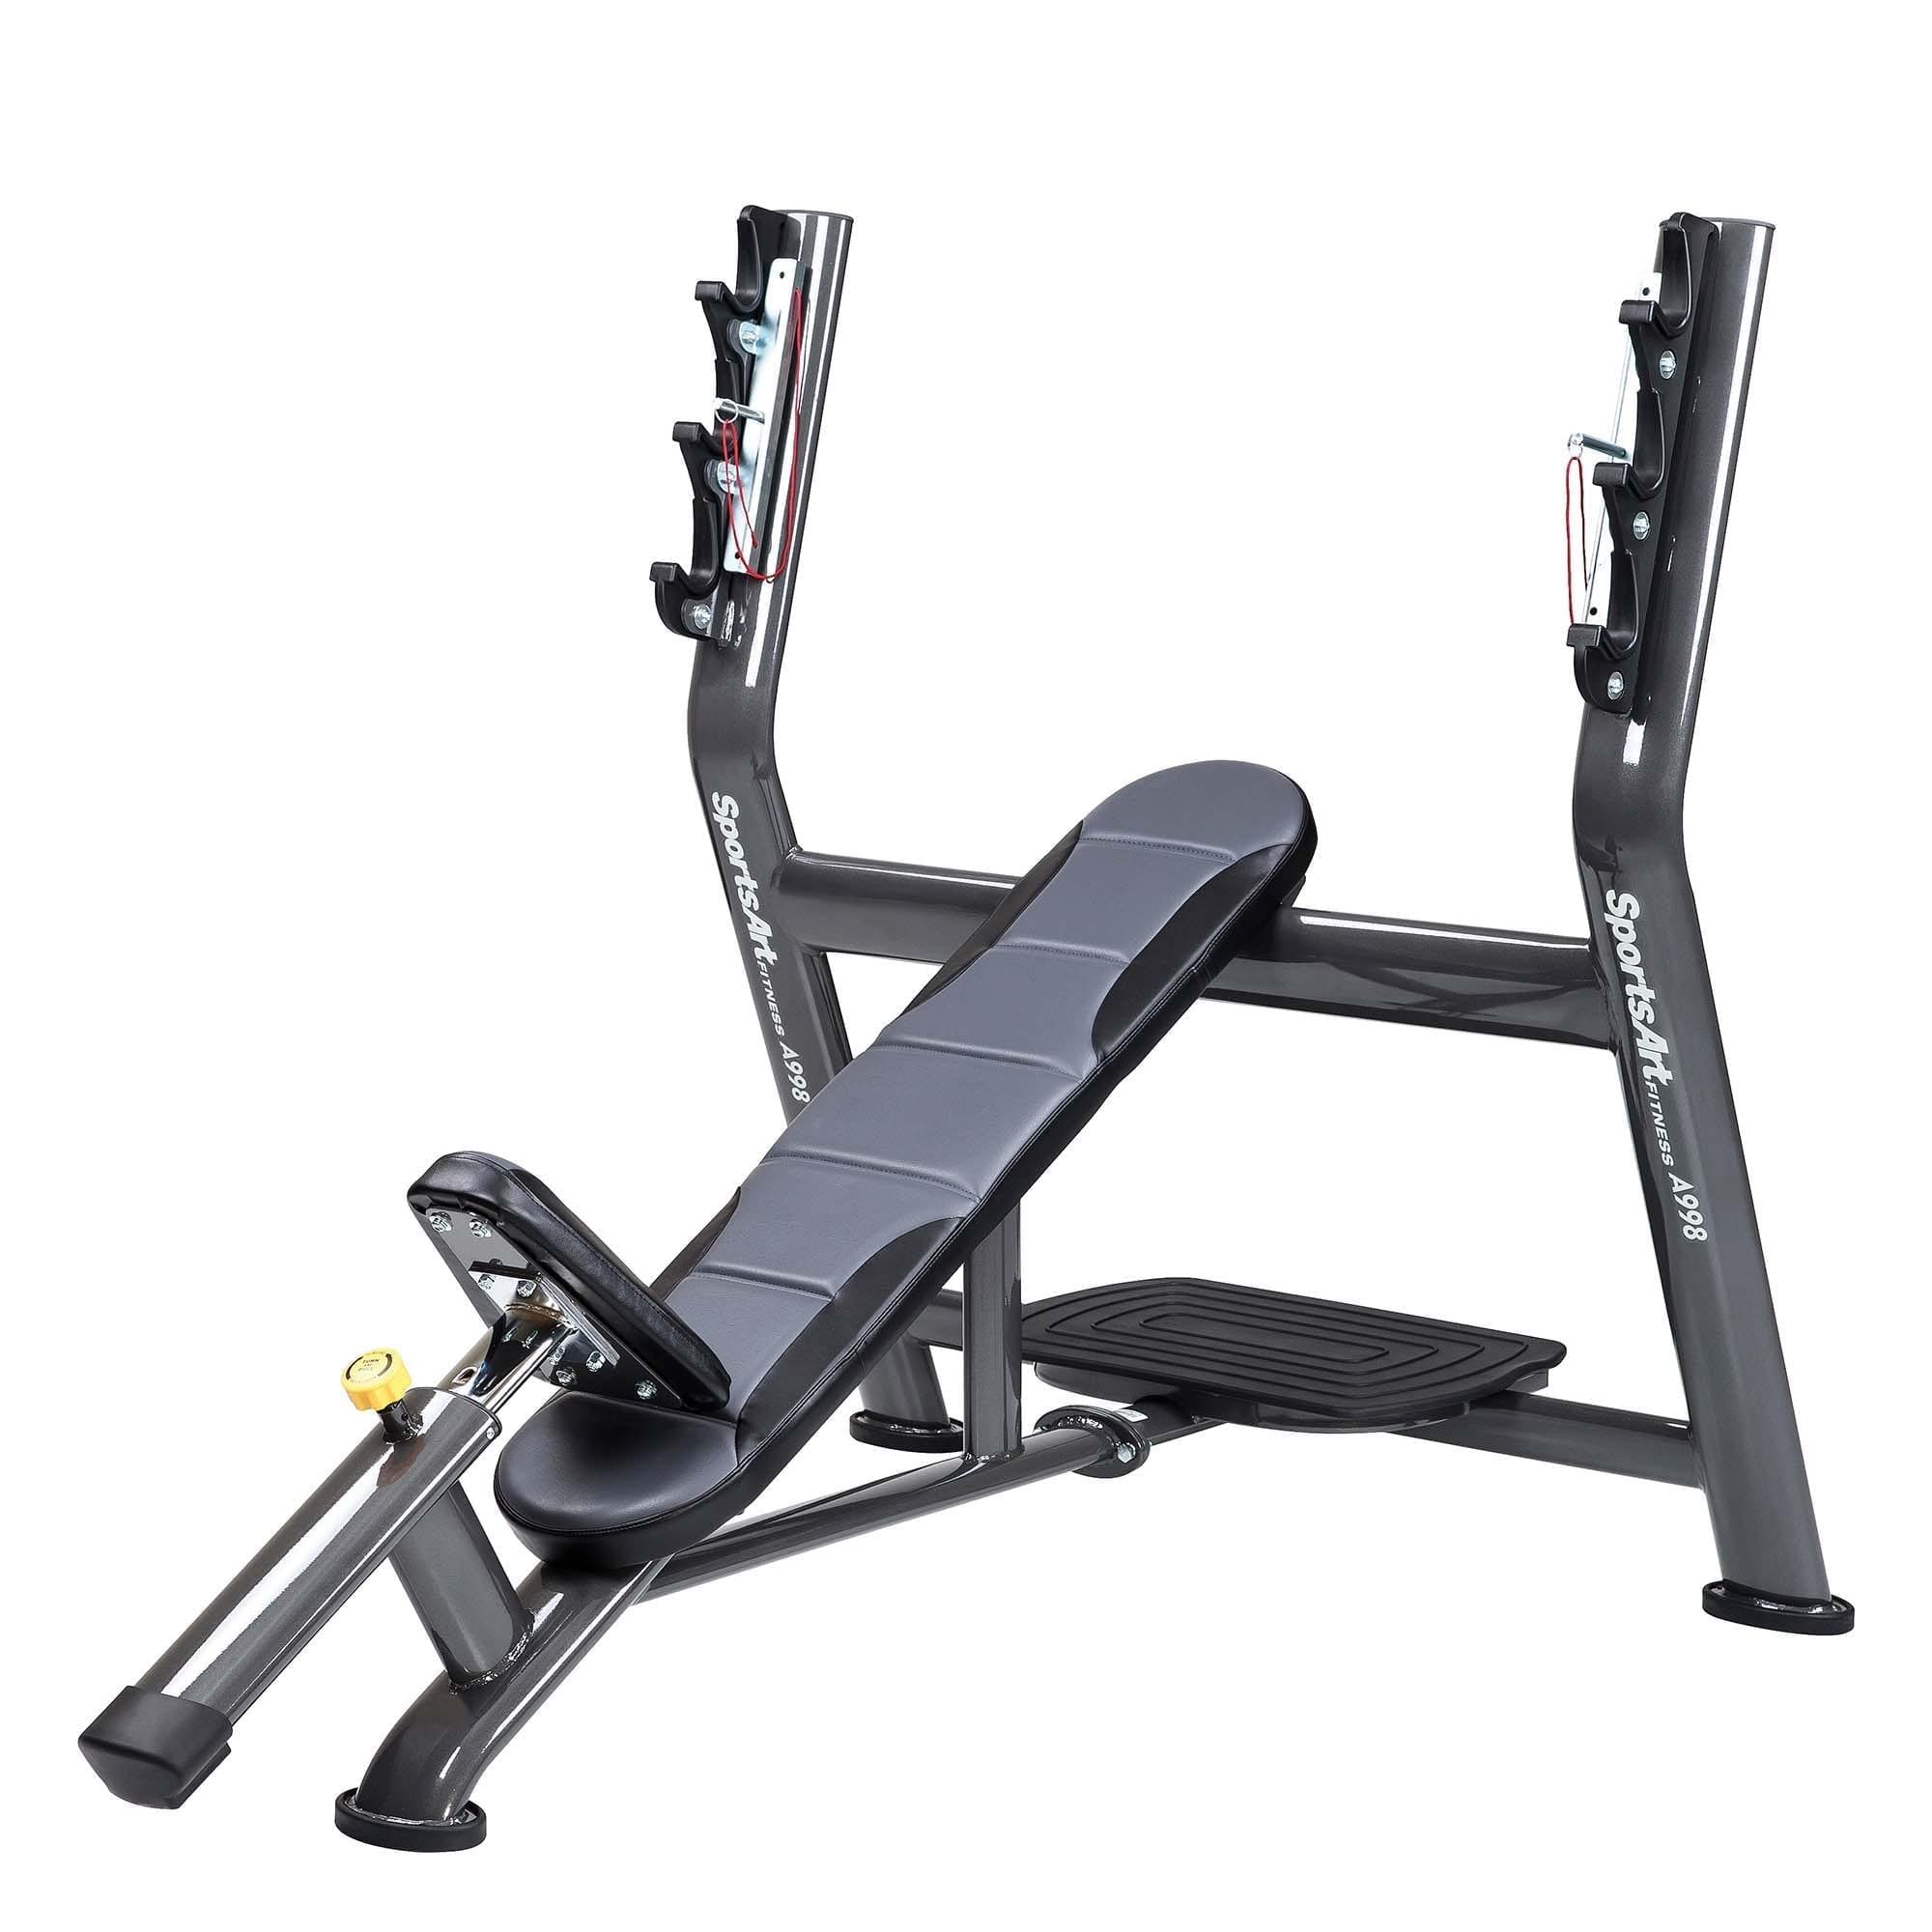 OLYMPIC INCLINE BENCH PRESS - SPORTSART (A998)